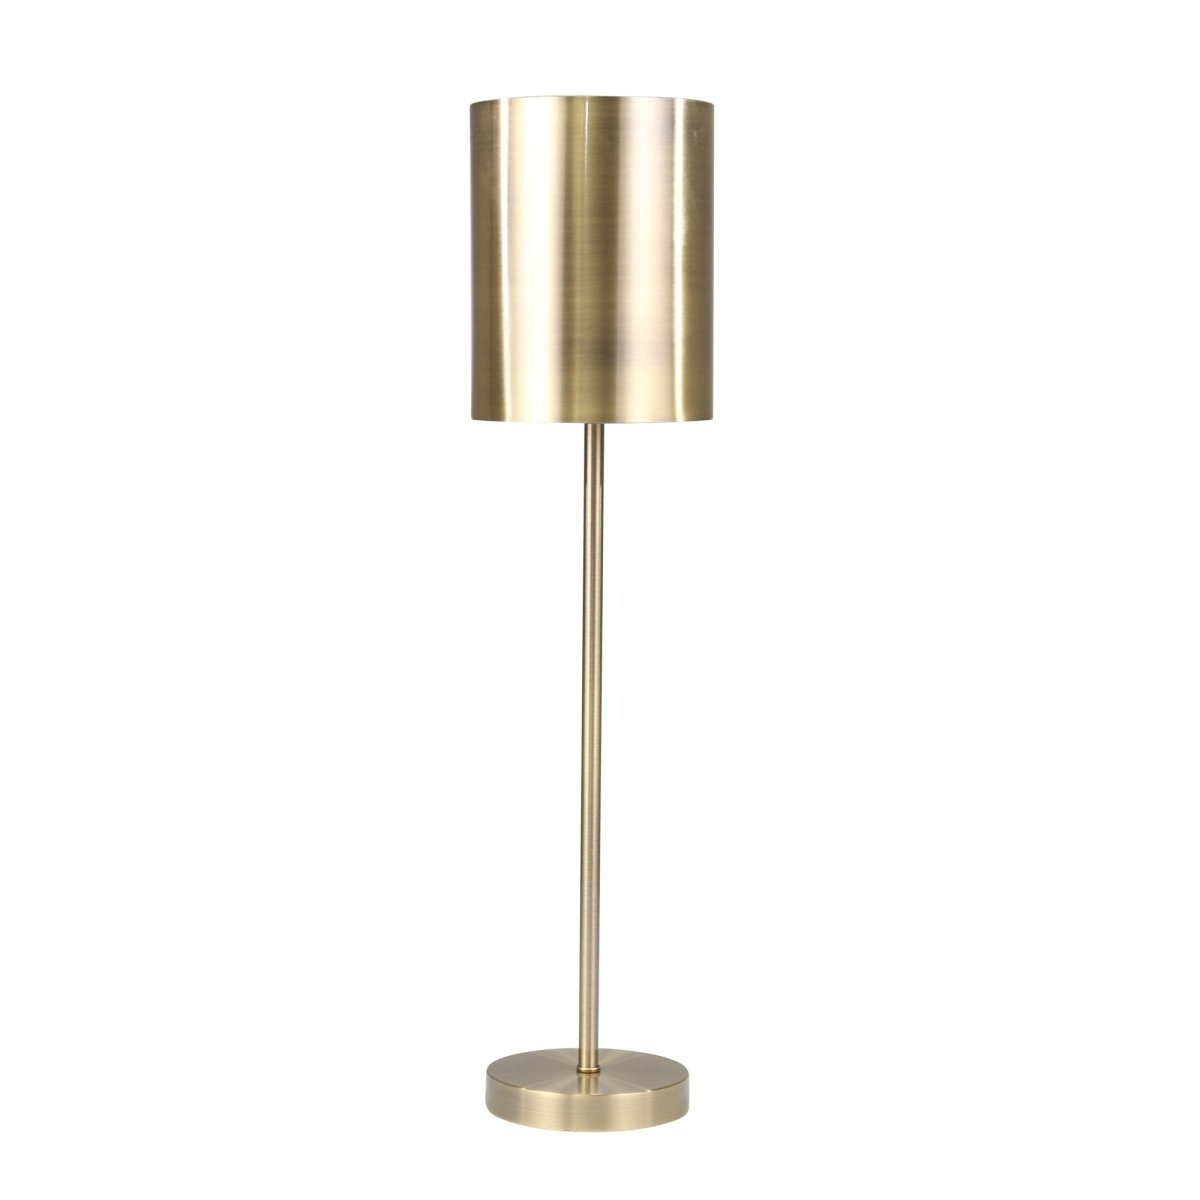 Sagebrook Home Brushed Gold Metal Table Lamp, 30"H - lily & onyx